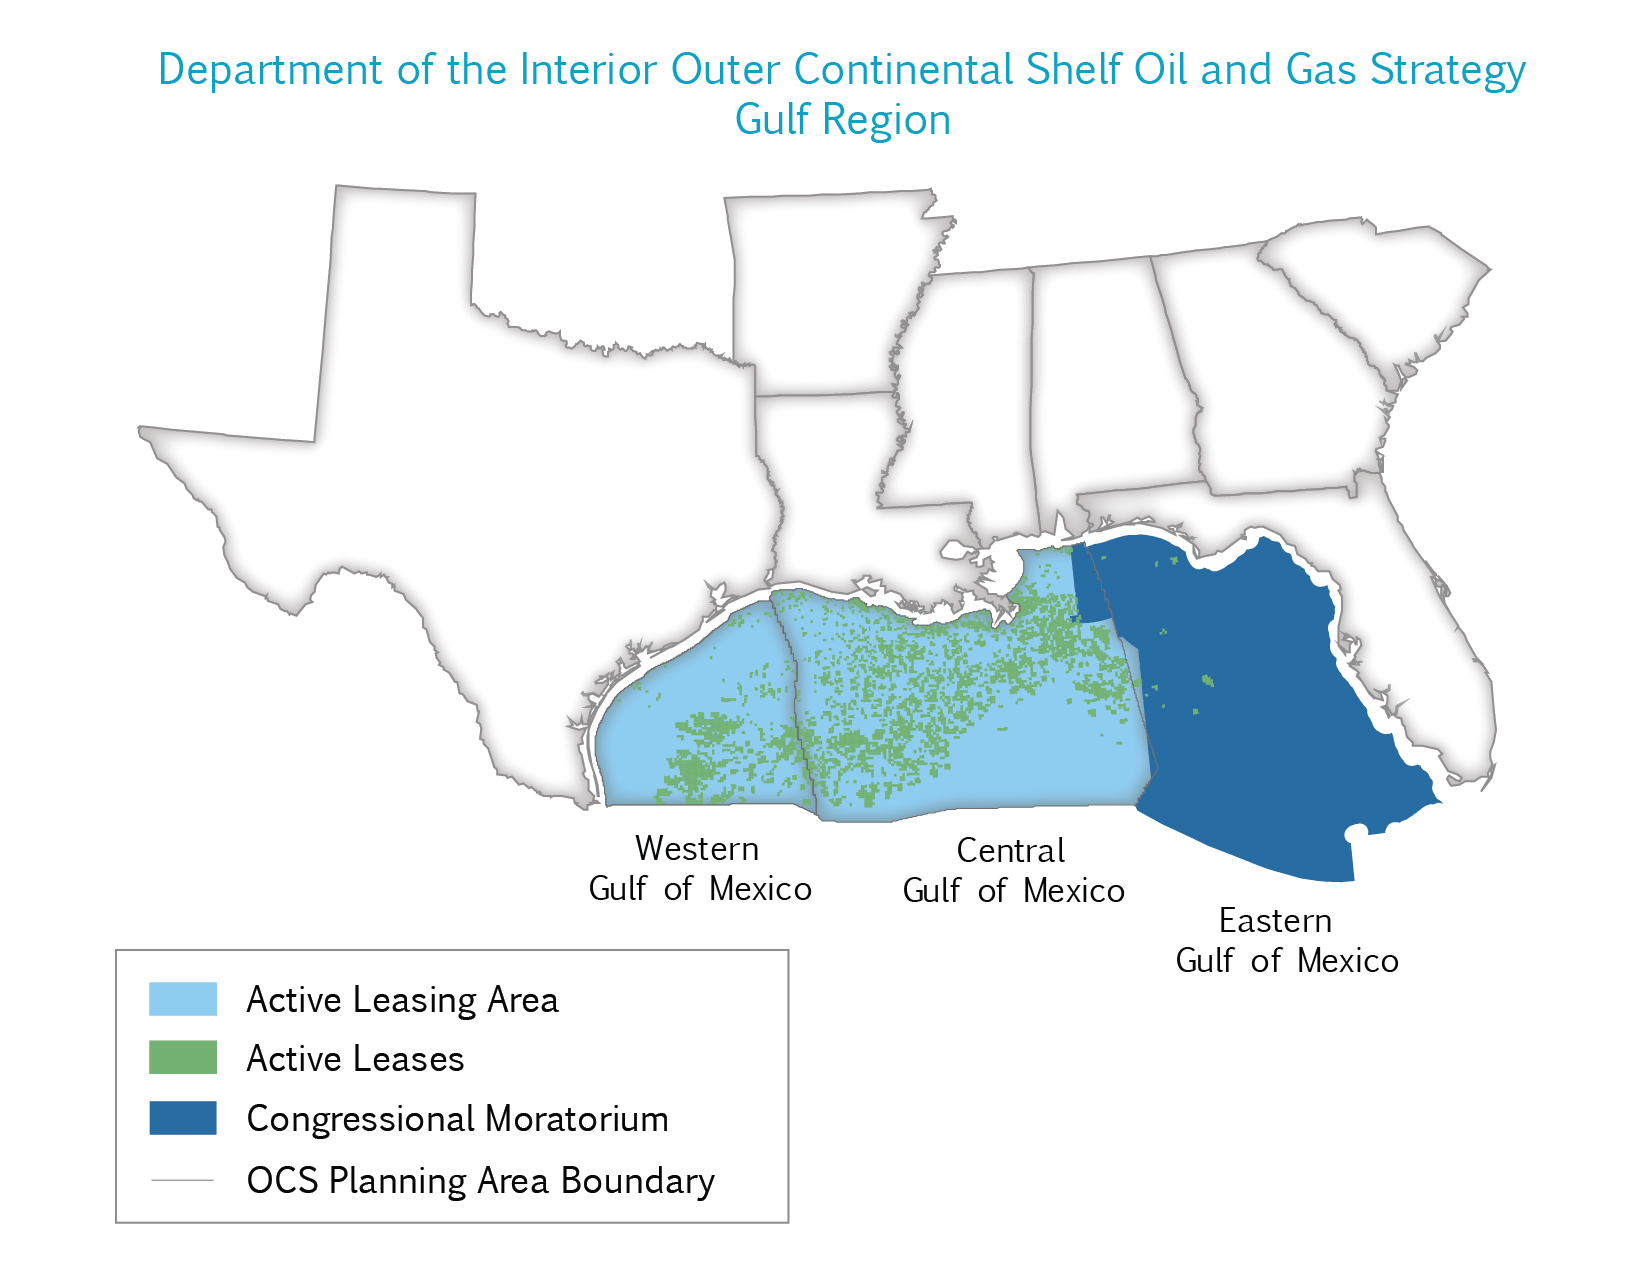 Gulf of Mexico | Bureau of Safety and Environmental Enforcement